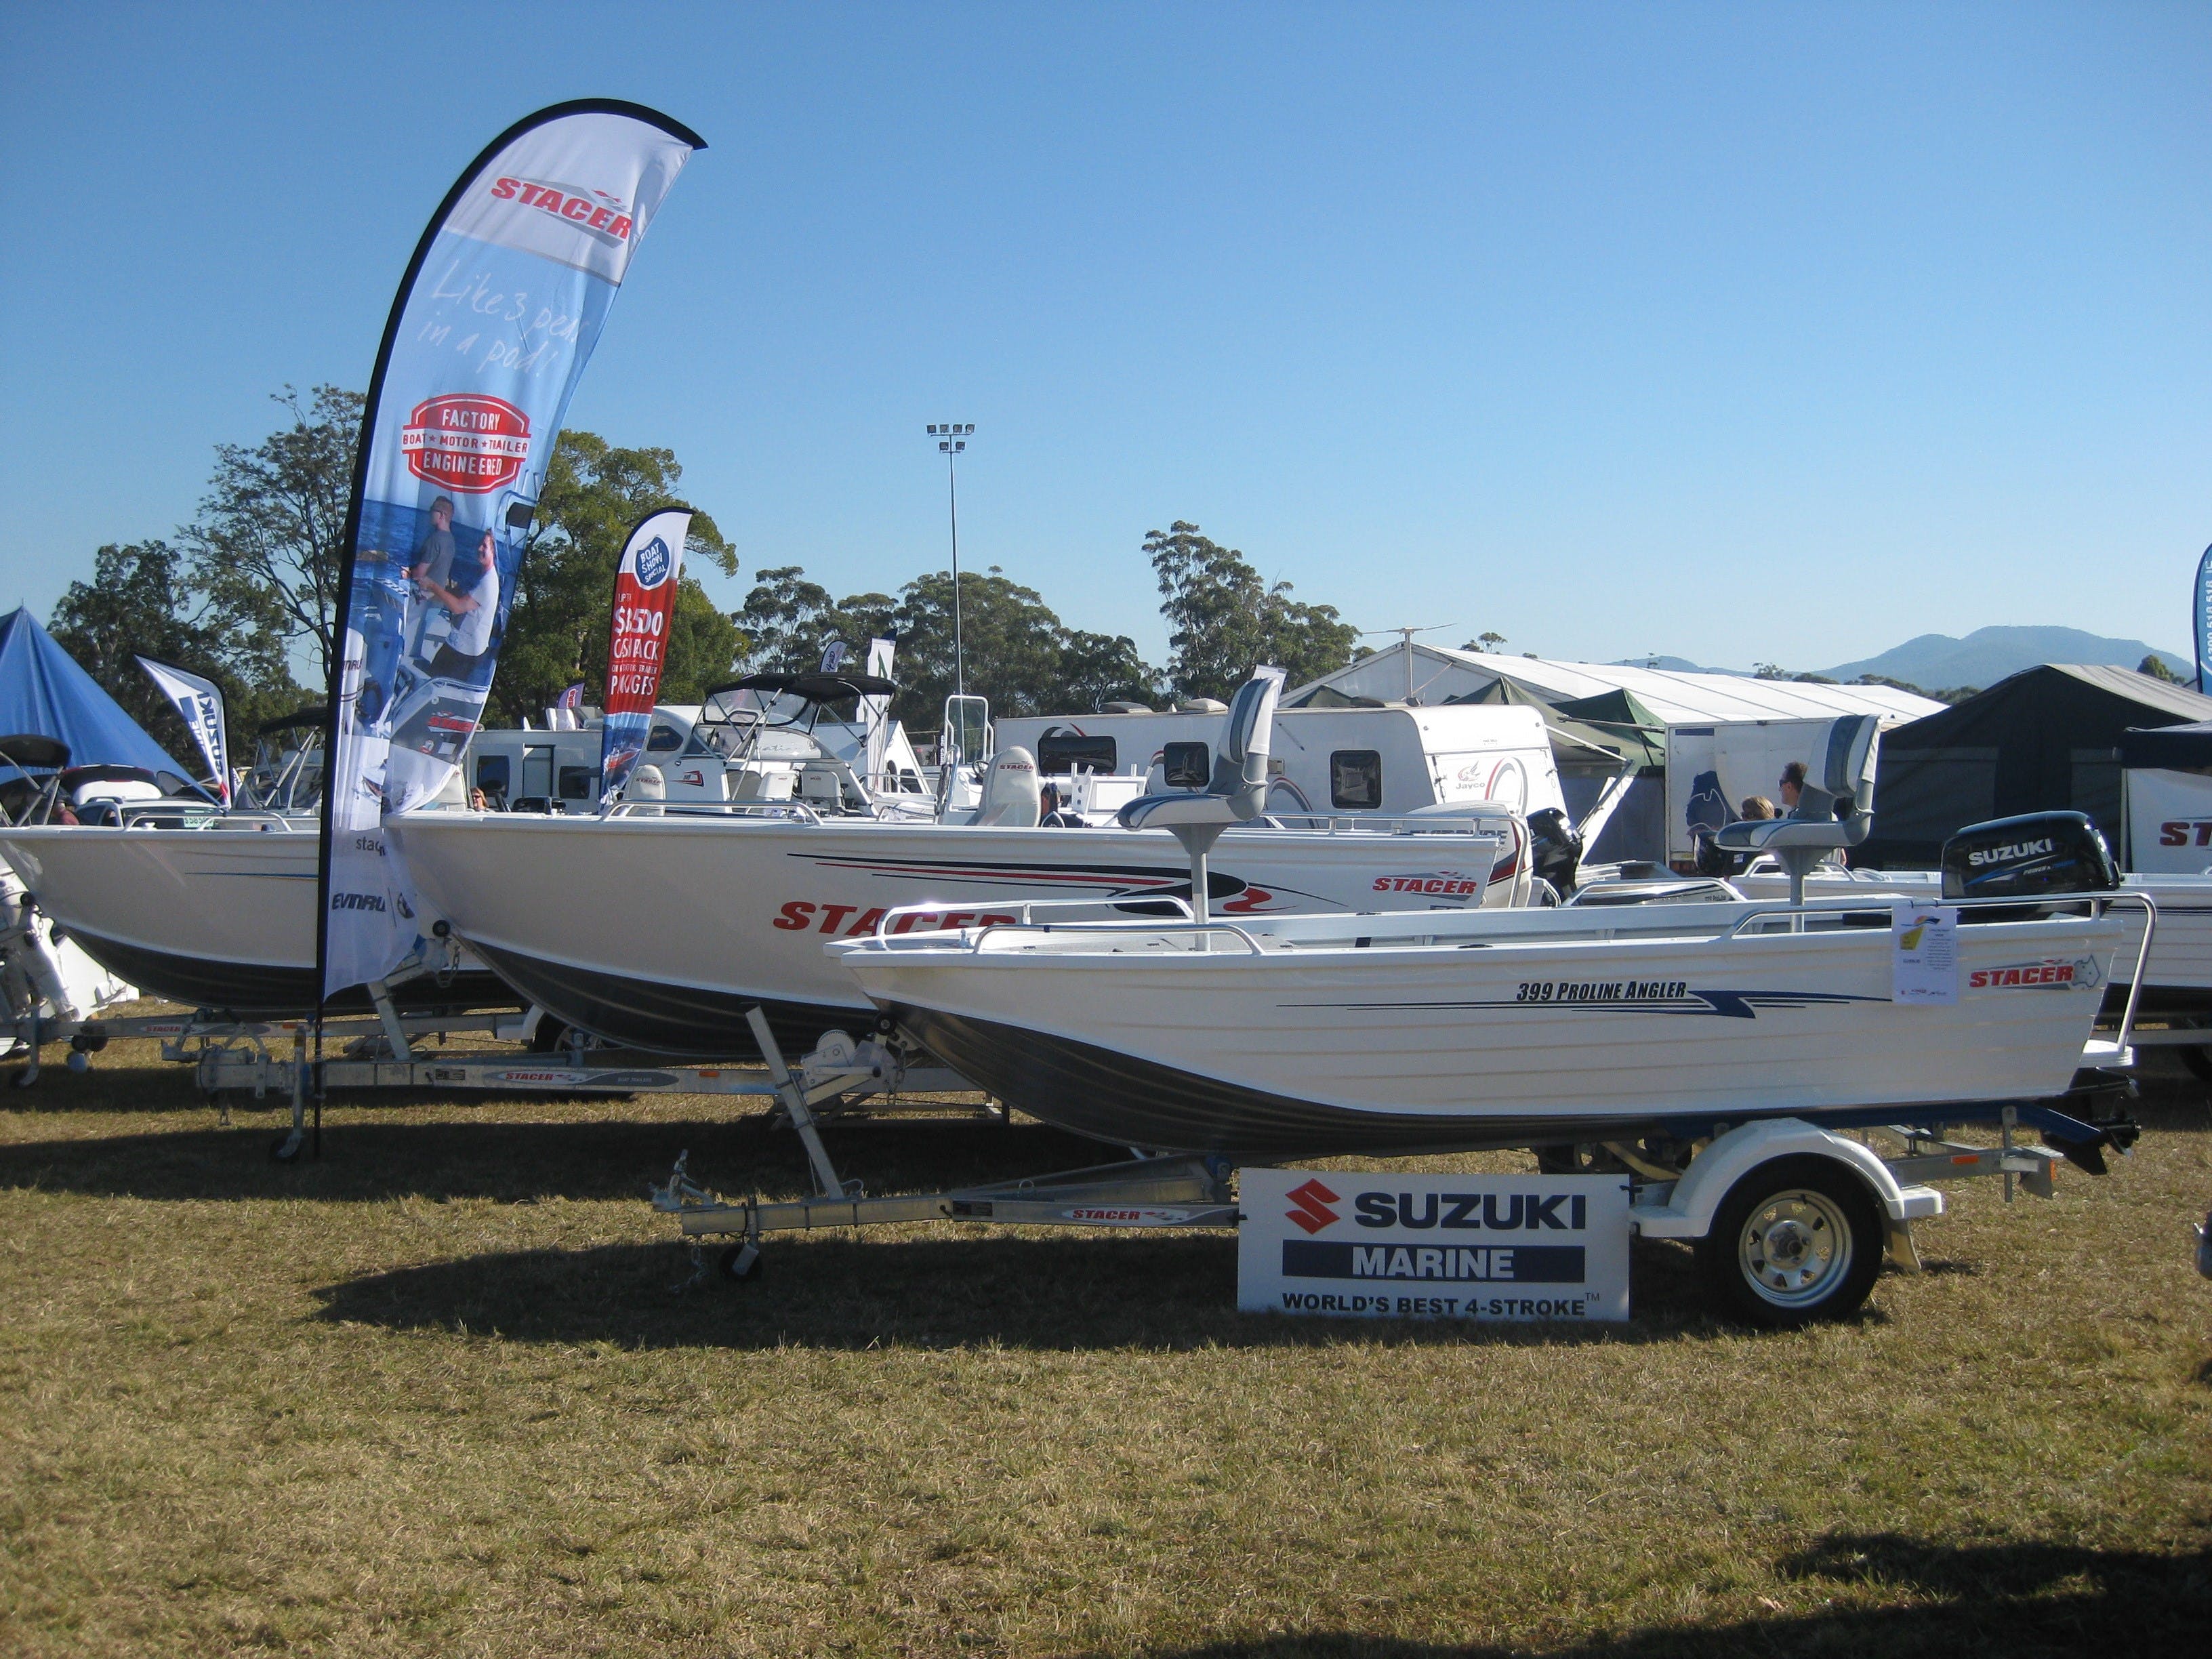 Mid North Coast Caravan Camping 4WD Fish and Boat Show - Melbourne Tourism